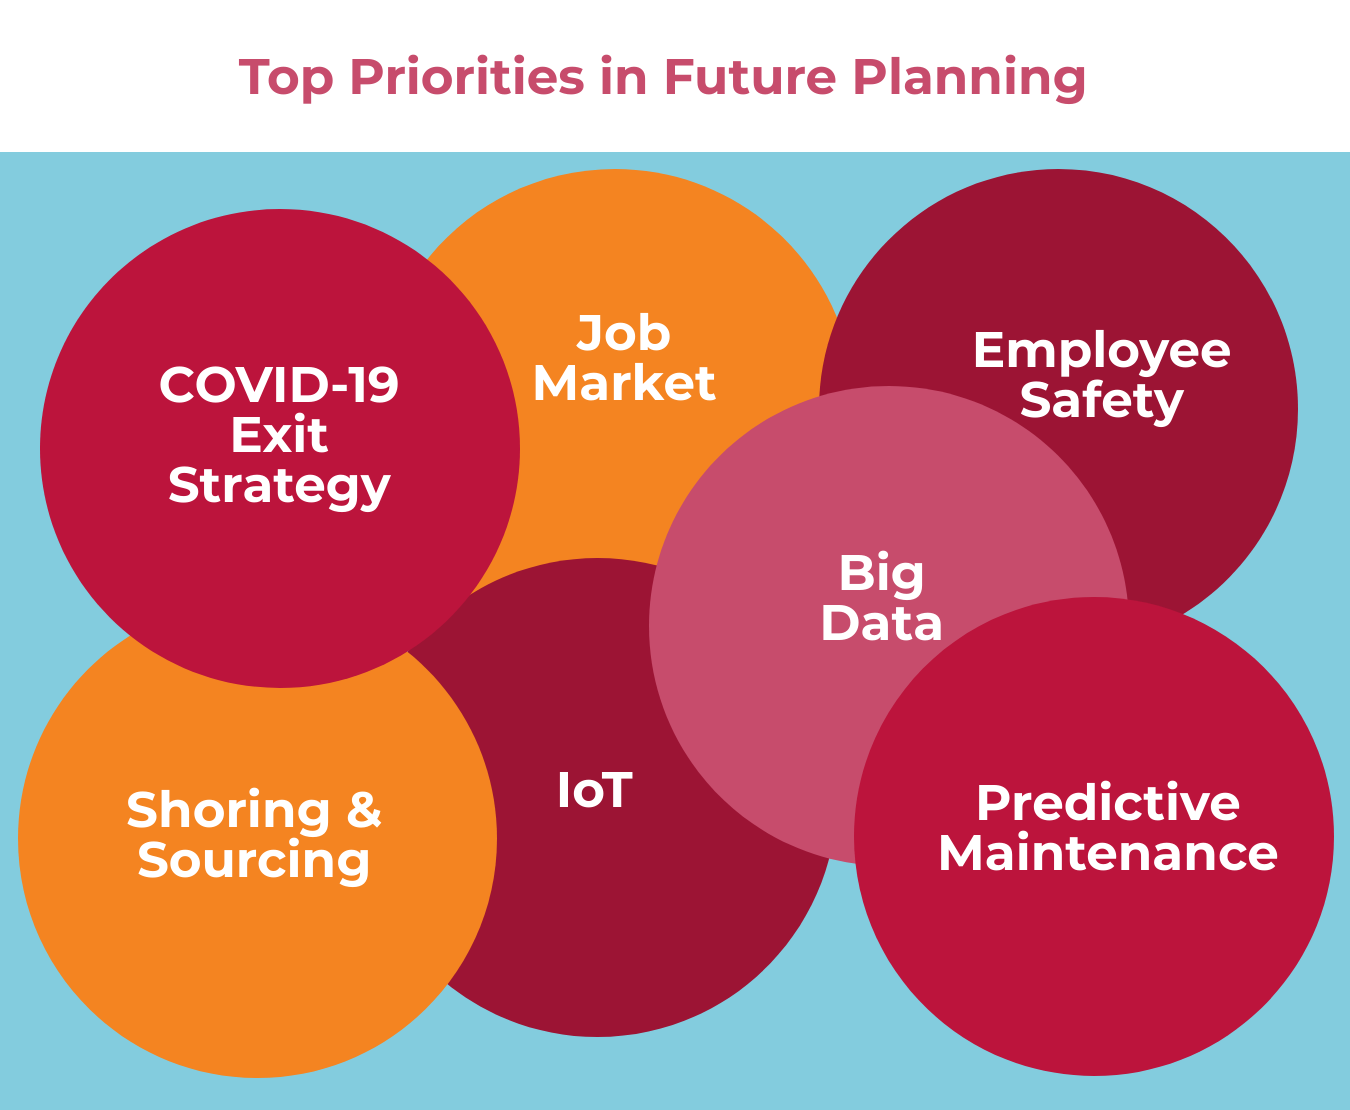 Future planning in manufacturing. StratMg took a look at industrial manufacturers’ priorities for the near future and found the following: COVID-19 exit strategy, job market, employee safety, shoring & reshoring, IoT (Internet of Things), Big Data, Predictive maintenance.